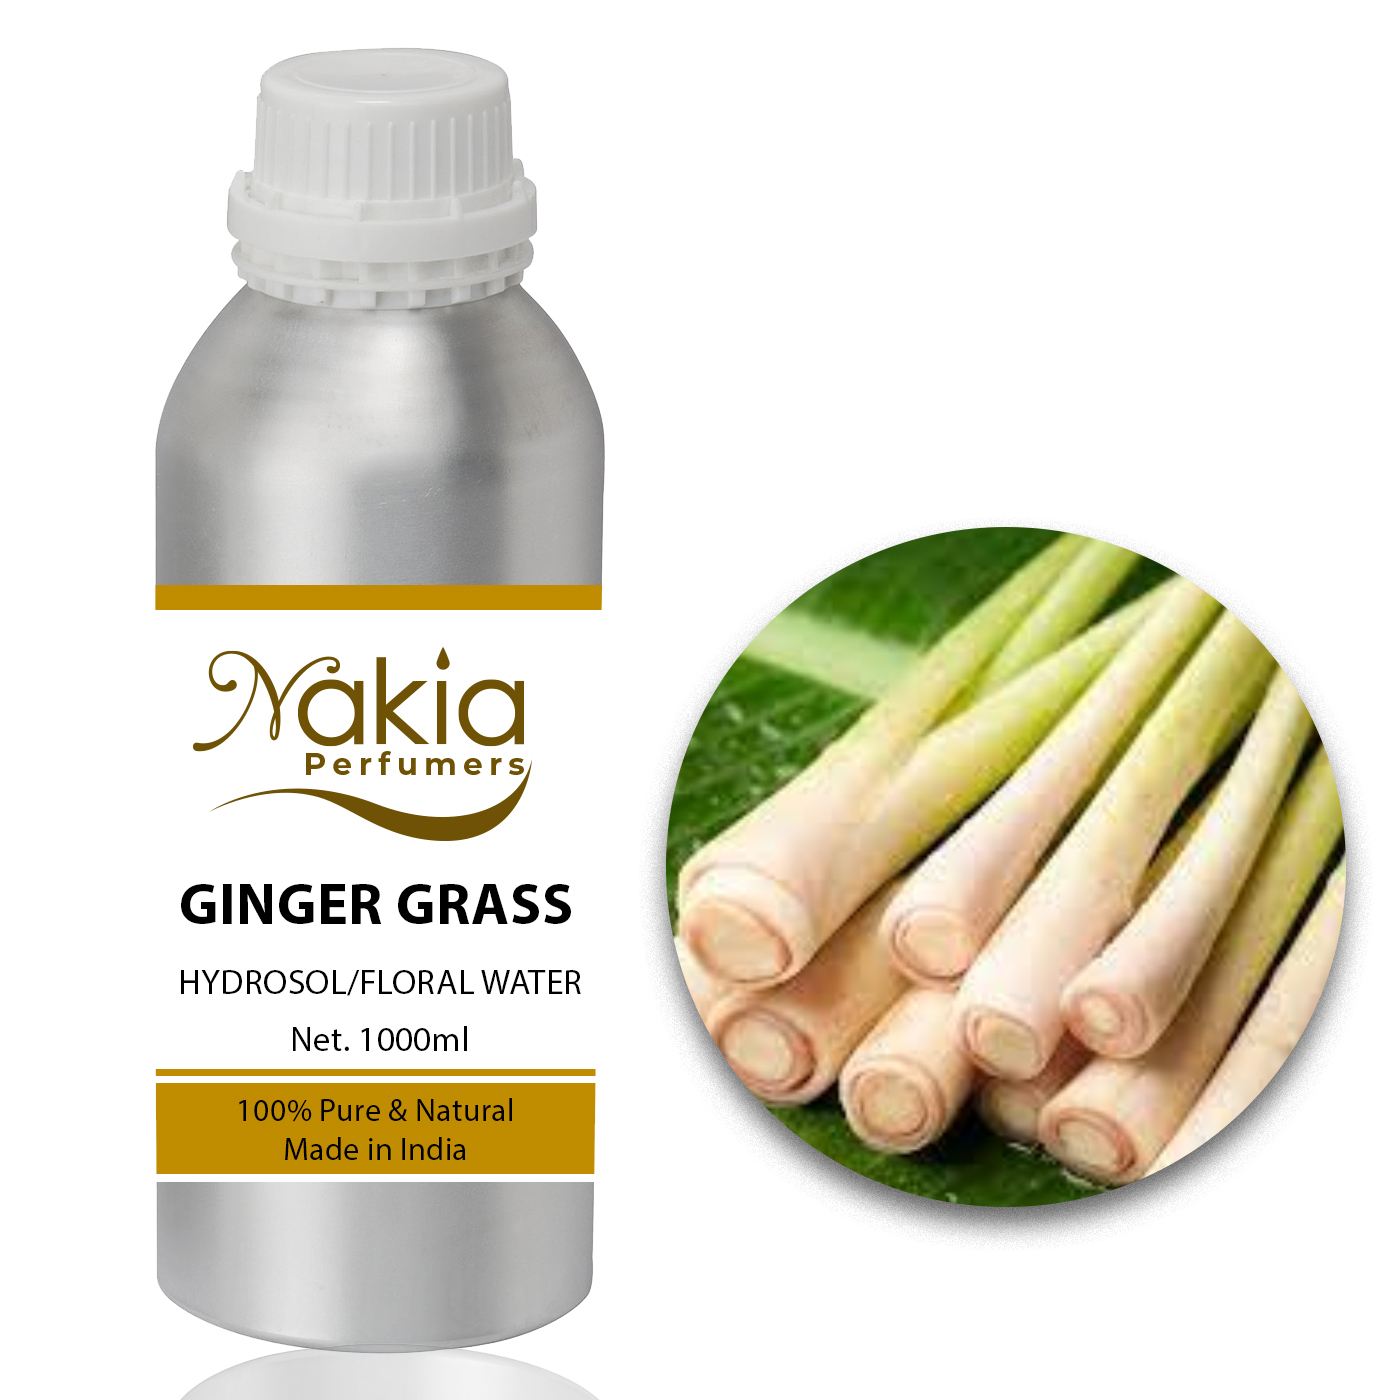 GINGER-GRASS FLORAL WATER/HYDROSOL